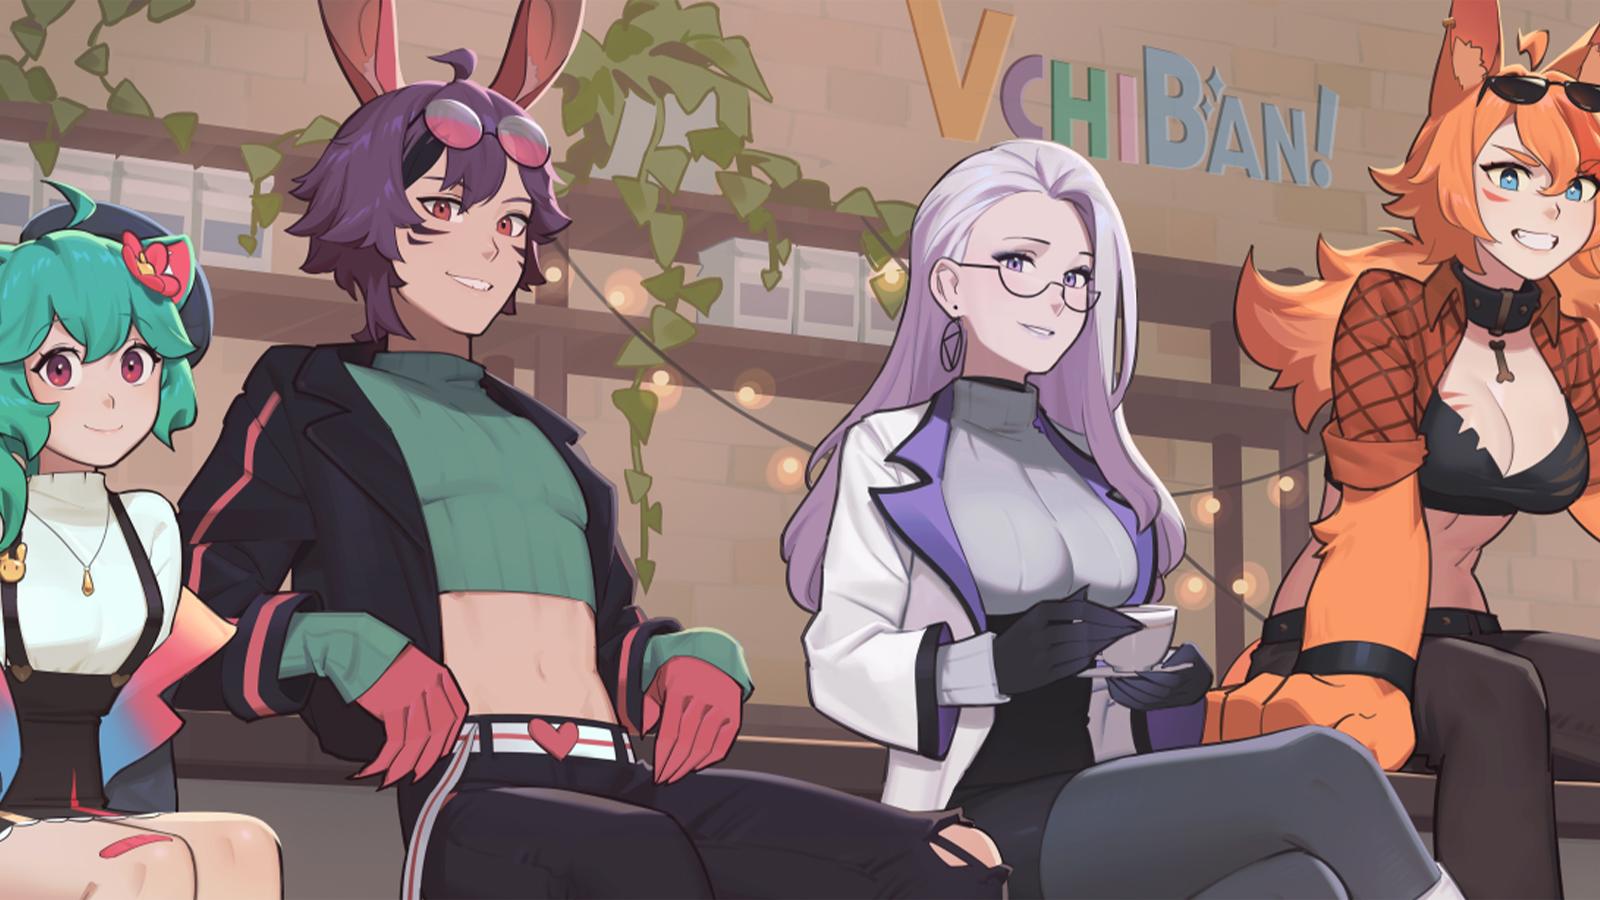 VchiBan's four VTubers, Rose, Shia, Candii, and Buff sitting in cafe